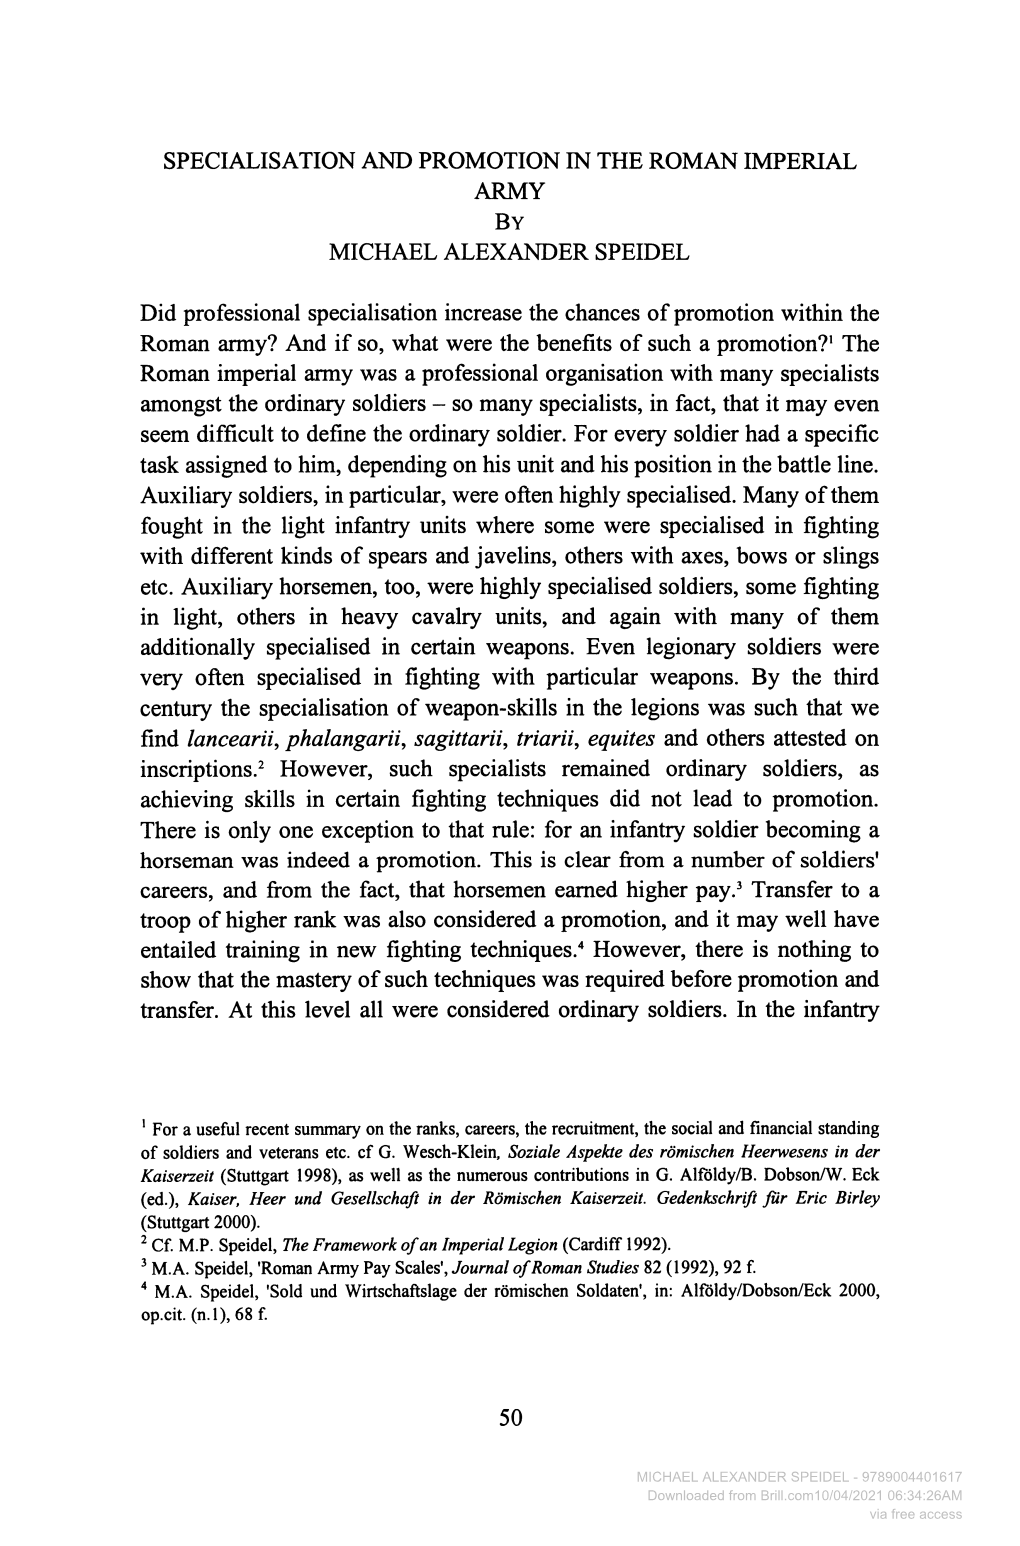 Specialisation and Promotion in the Roman Imperial Army by Michael Alexander Speidel